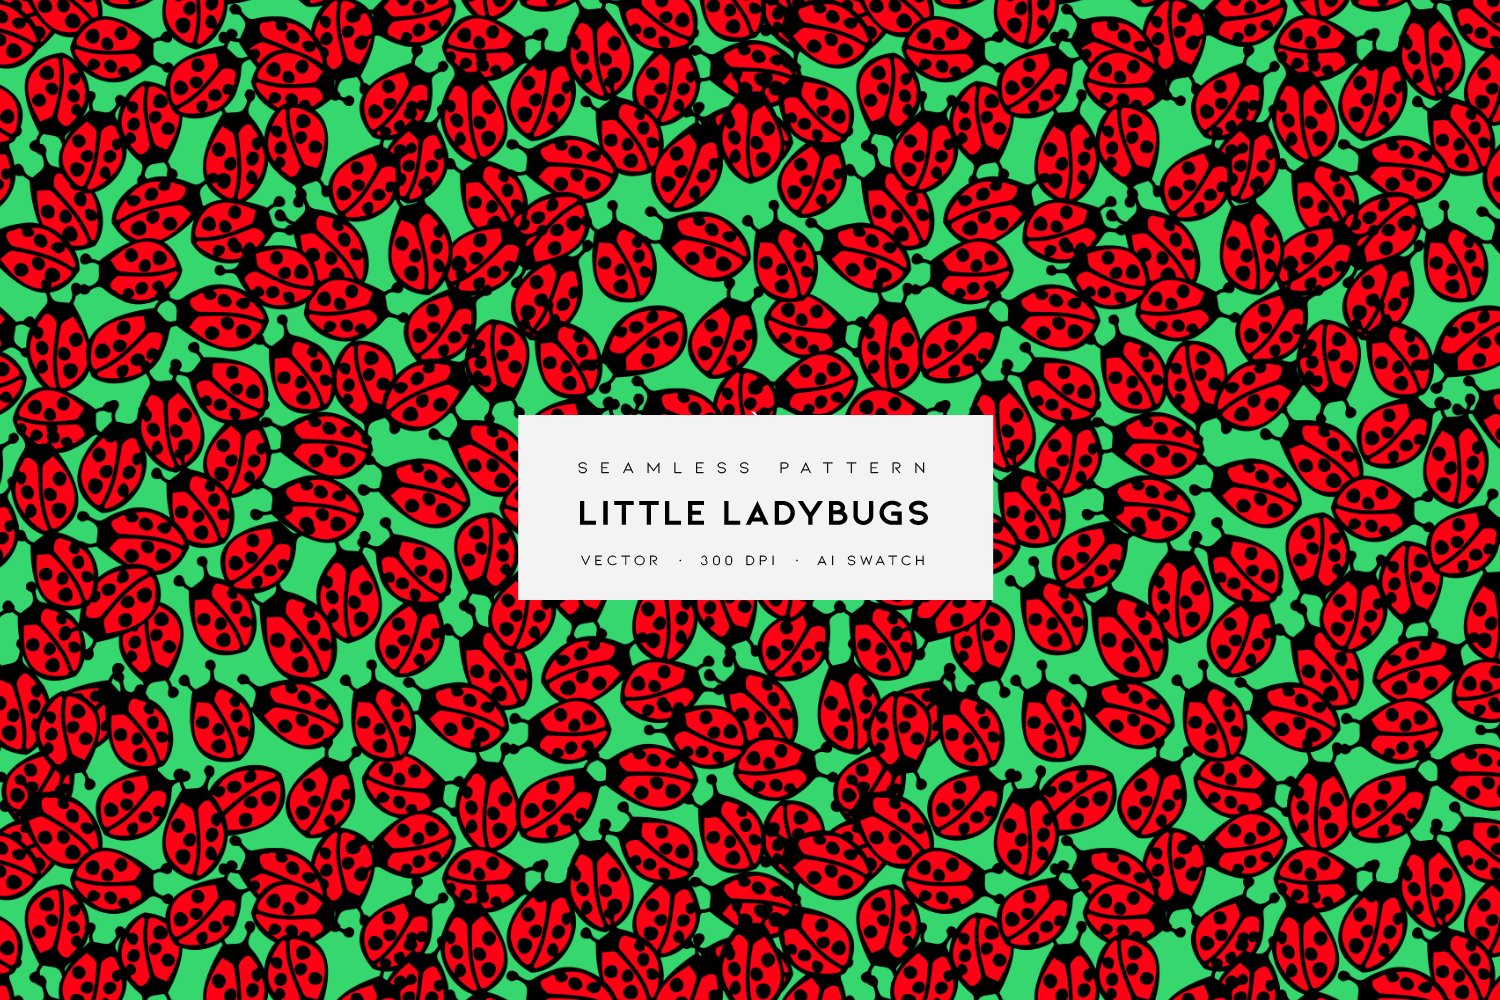 Little Ladybugs | Vector Pattern cover image.